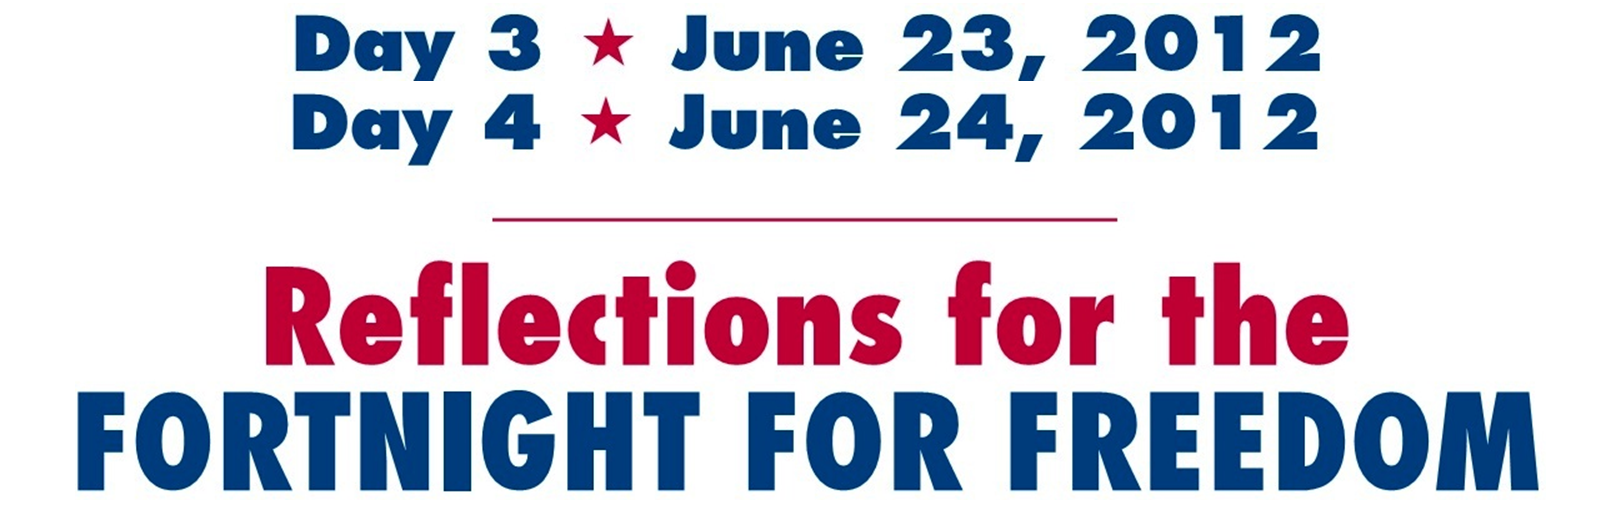 Day_3-4_Fortnight_for_Freedom_Reflection_Header.png